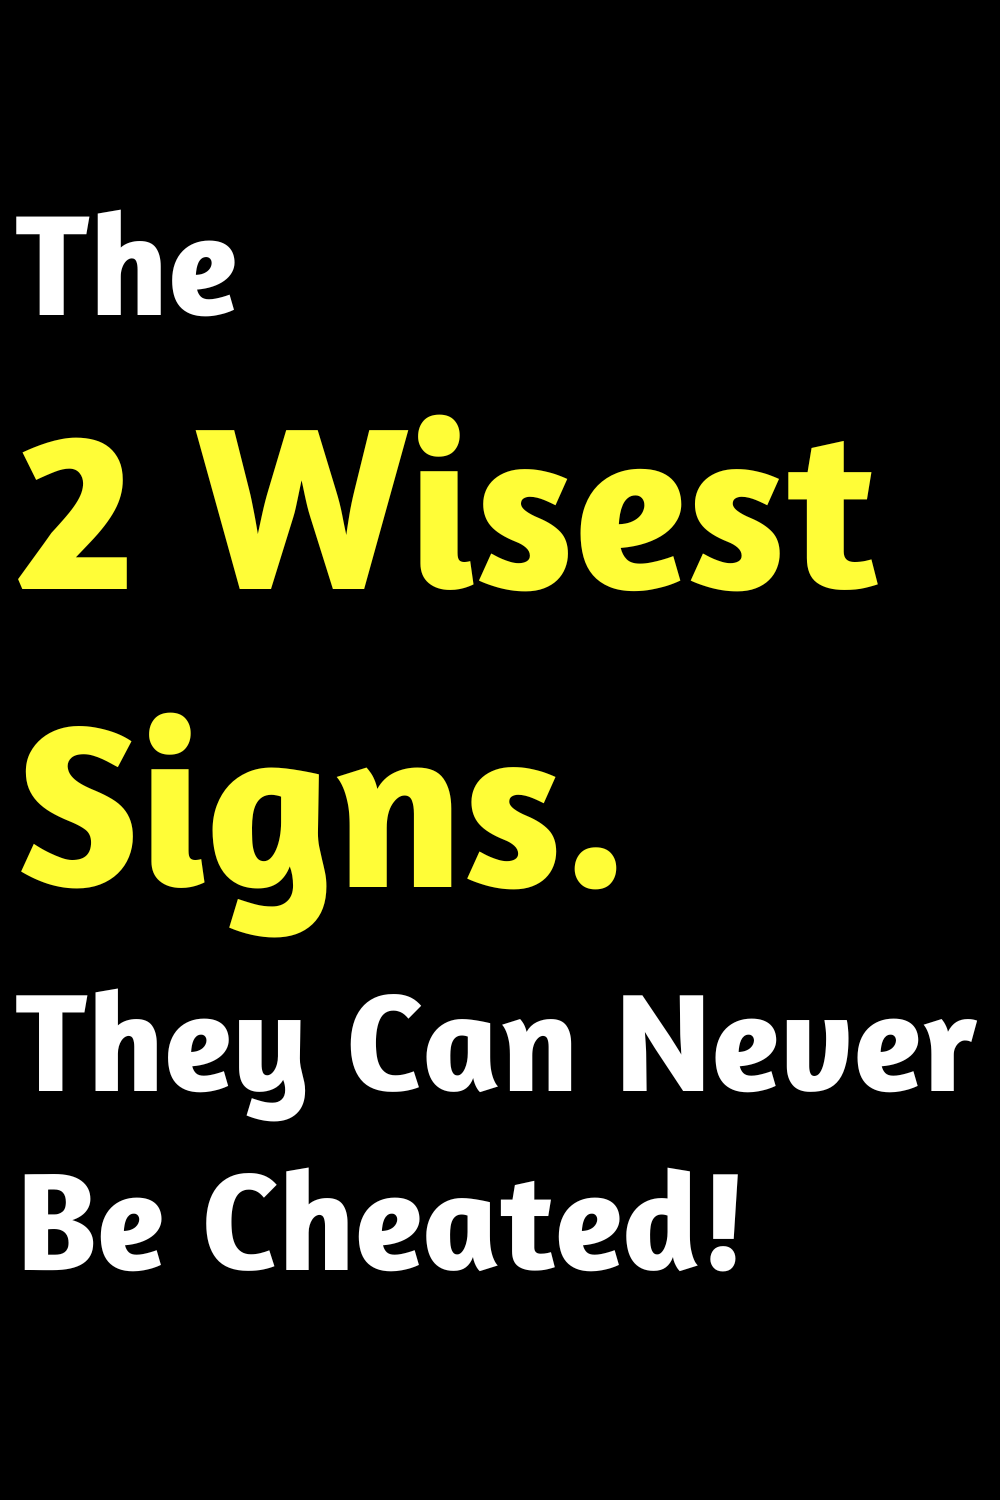 The 2 Wisest Signs. They Can Never Be Cheated!